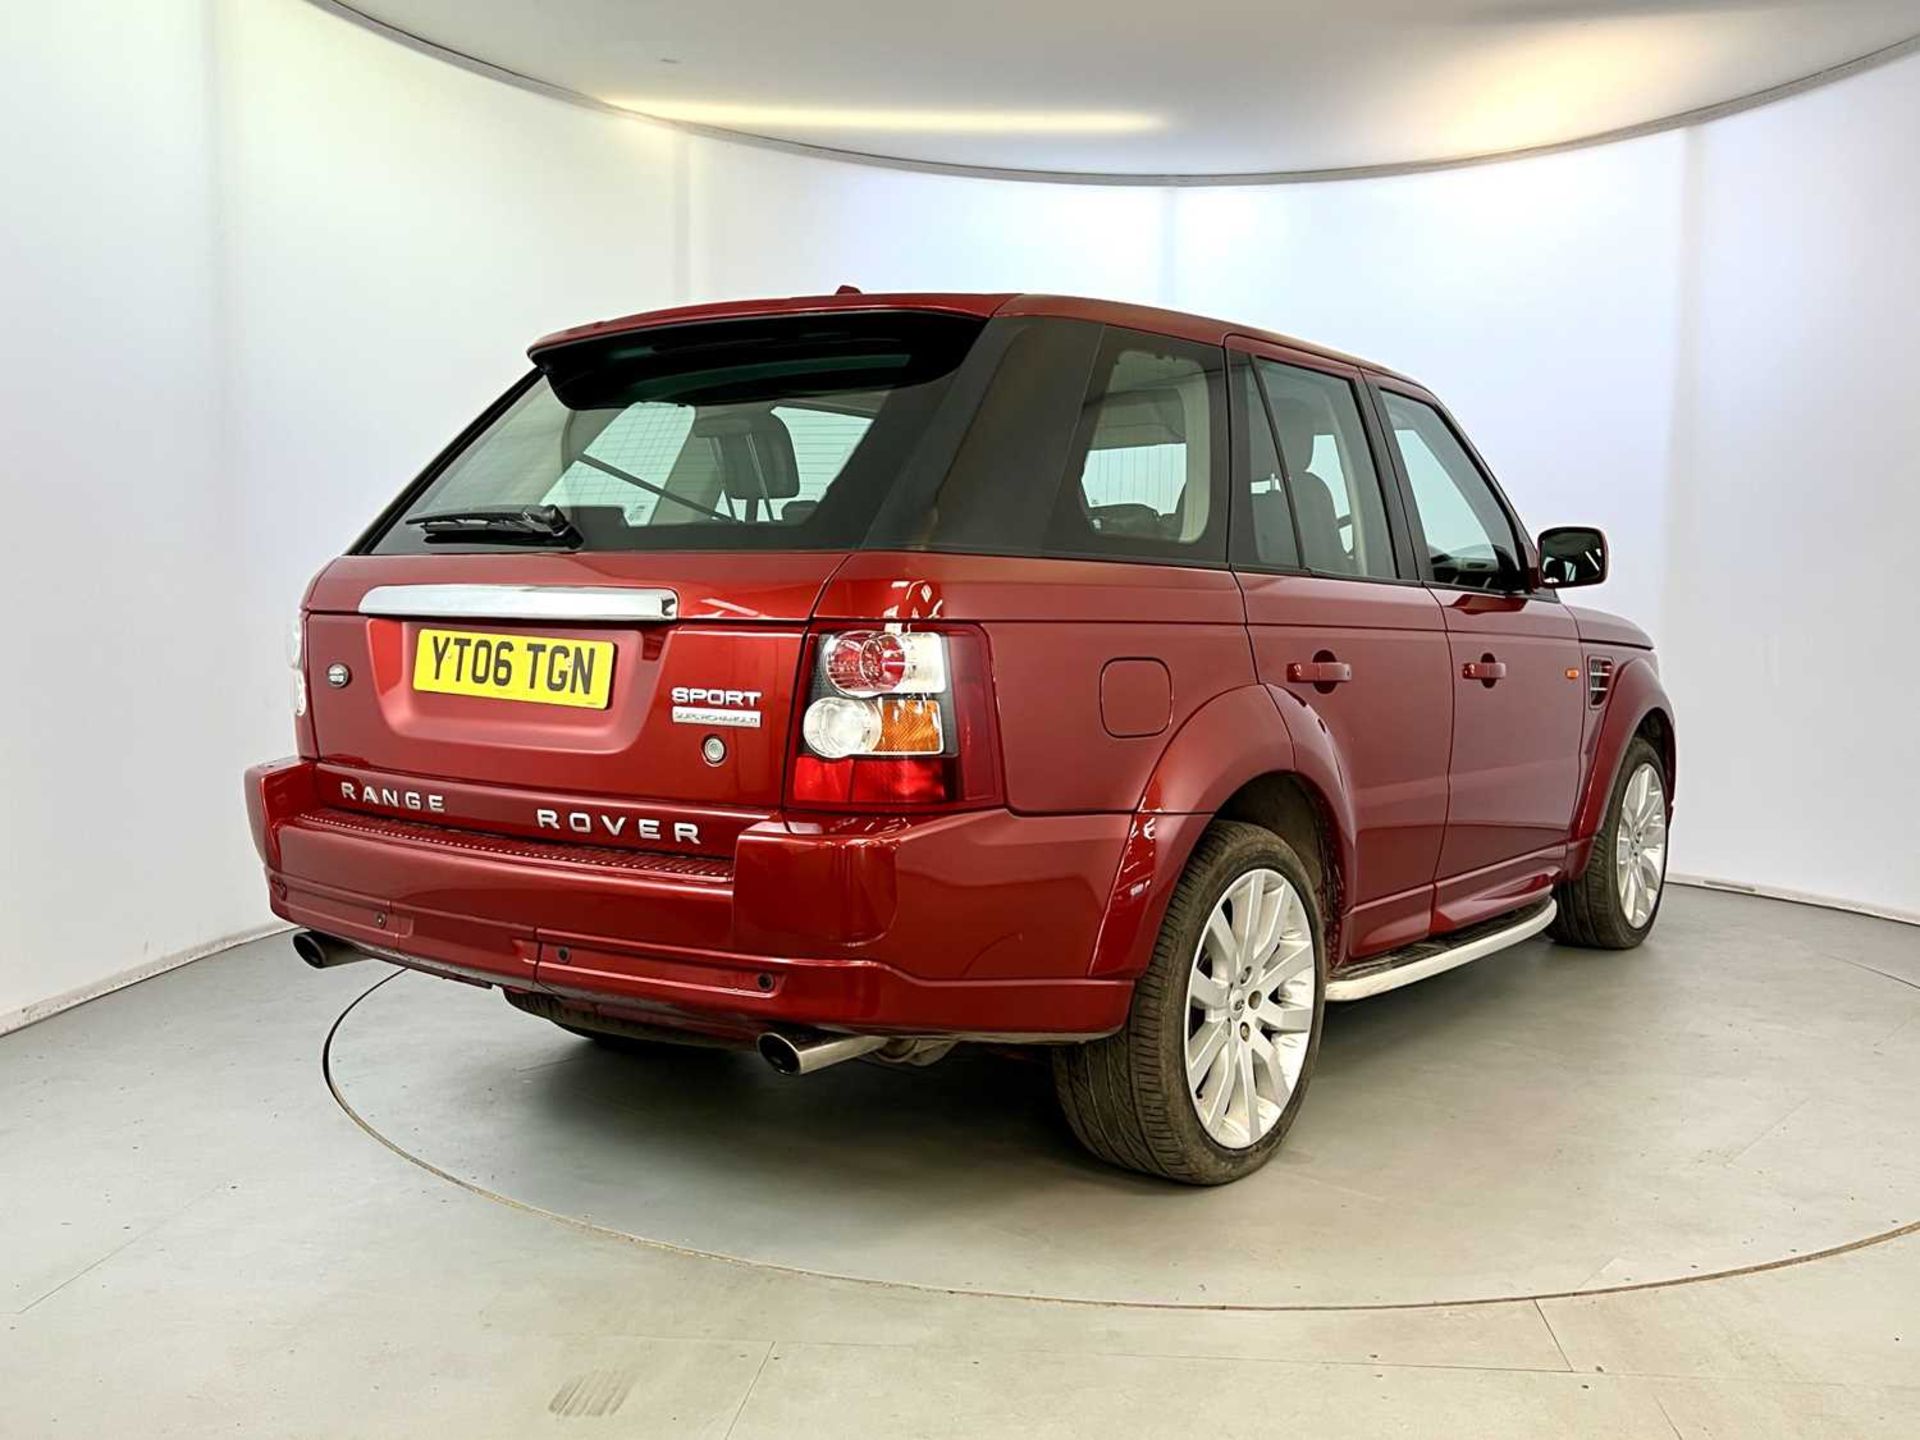 2006 Range Rover Sport 4.2 Supercharged - Image 9 of 34